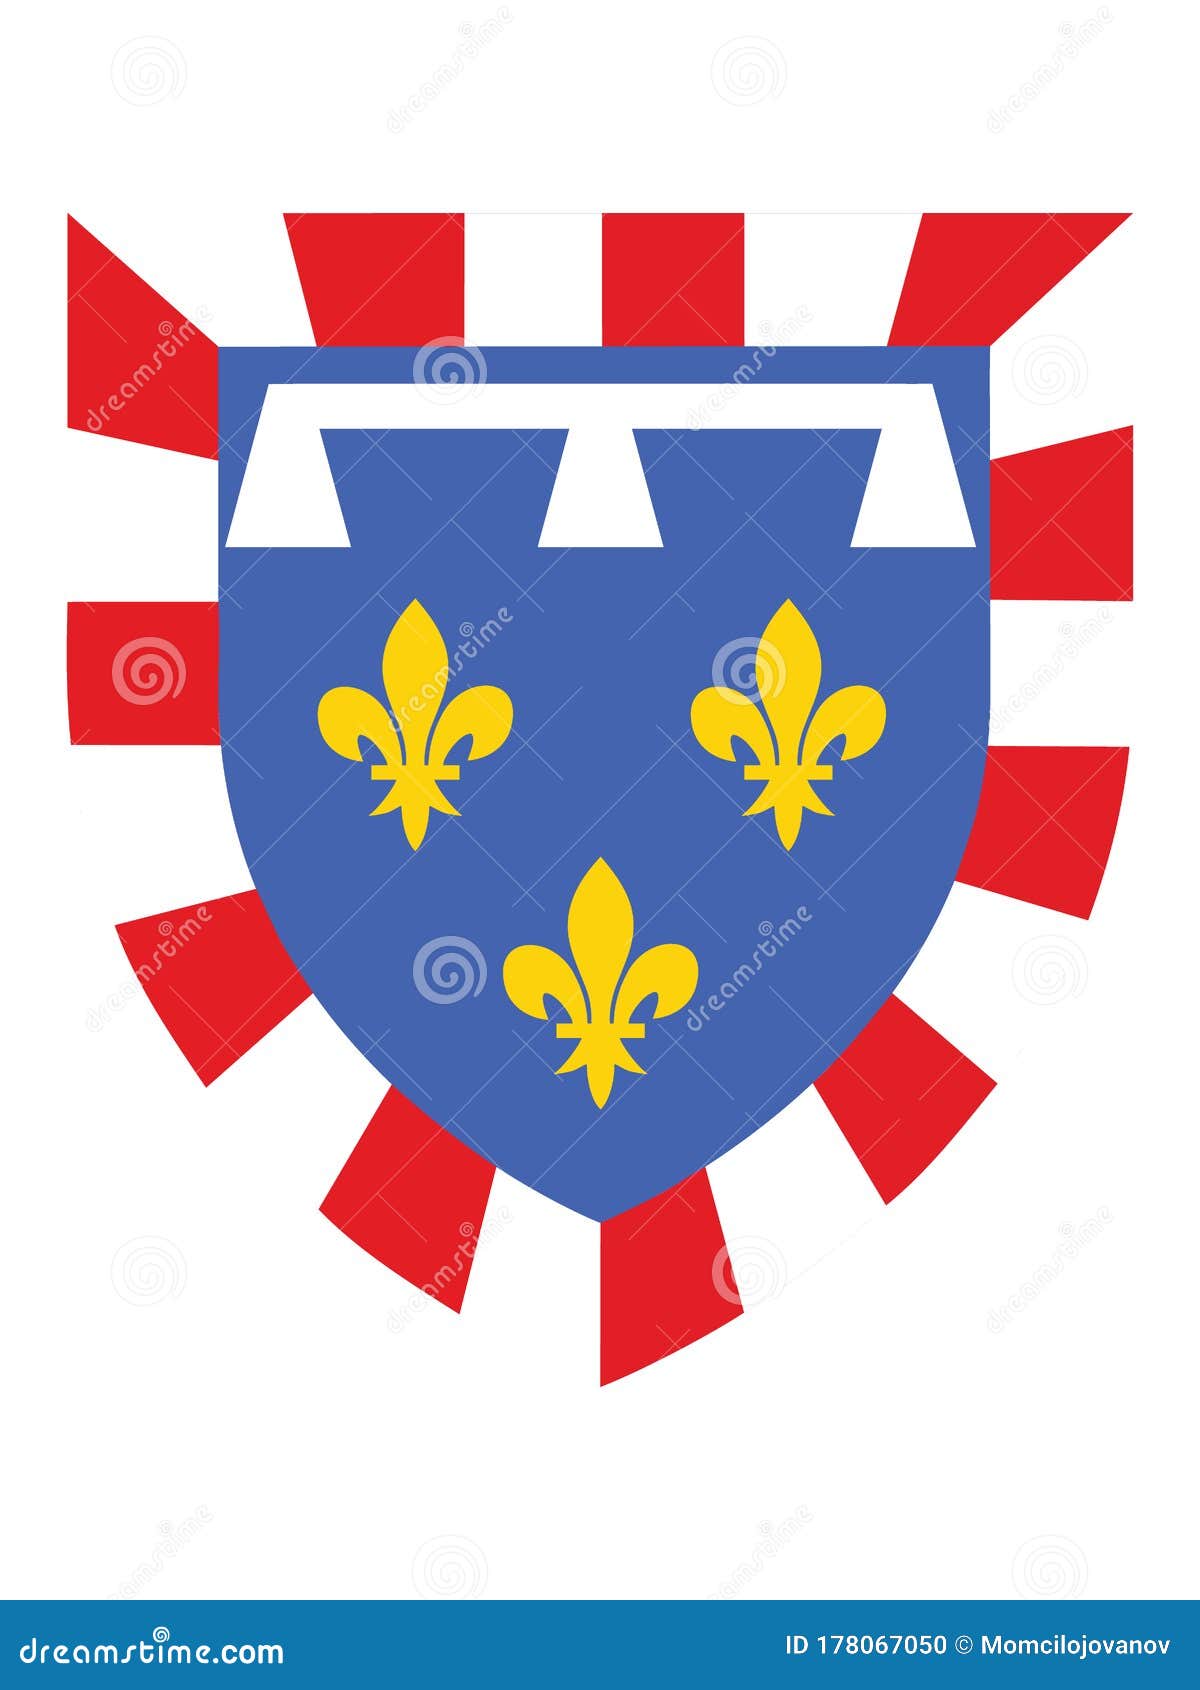 Coat of Arms of Centre-Val De Loire Stock Vector - Illustration of ...